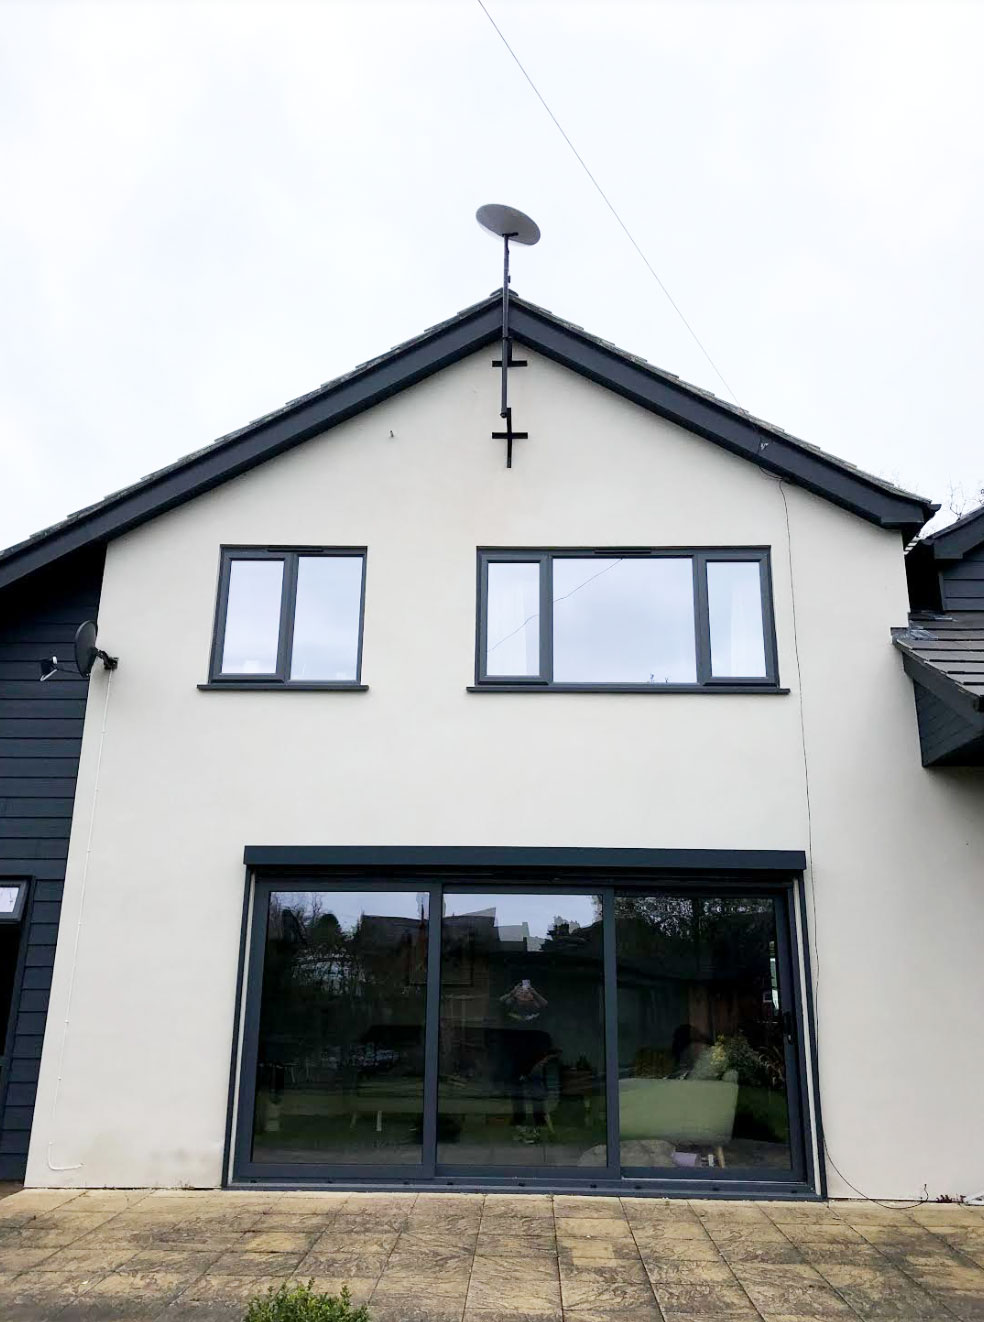 Starlink dish Installation on a lovely modern house in Chertsey in Surrey. Cable fed into loft to connect up to the router.